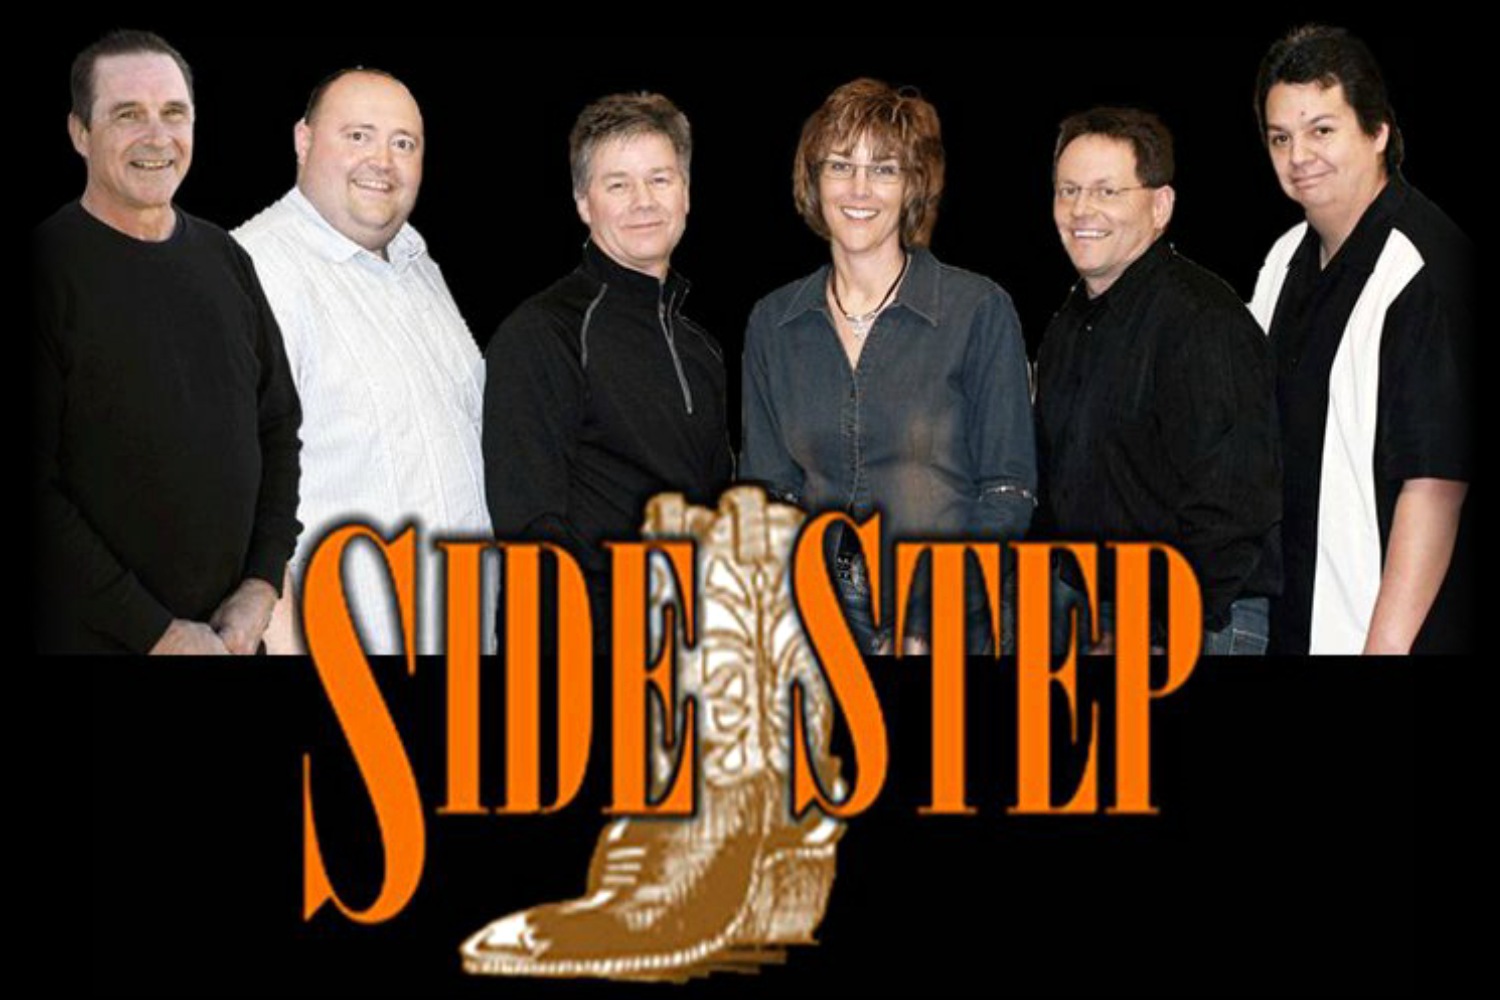 Live Music featuring SideStep at the
						Hay Days Celebration in Atkinson, Nebraska - 
						Northeast Nebraska Musicians SideStep   
						performing live  
						at the Hay Days Celebration in Atkinson, Nebraska  
						on Friday, August 19, 2016.